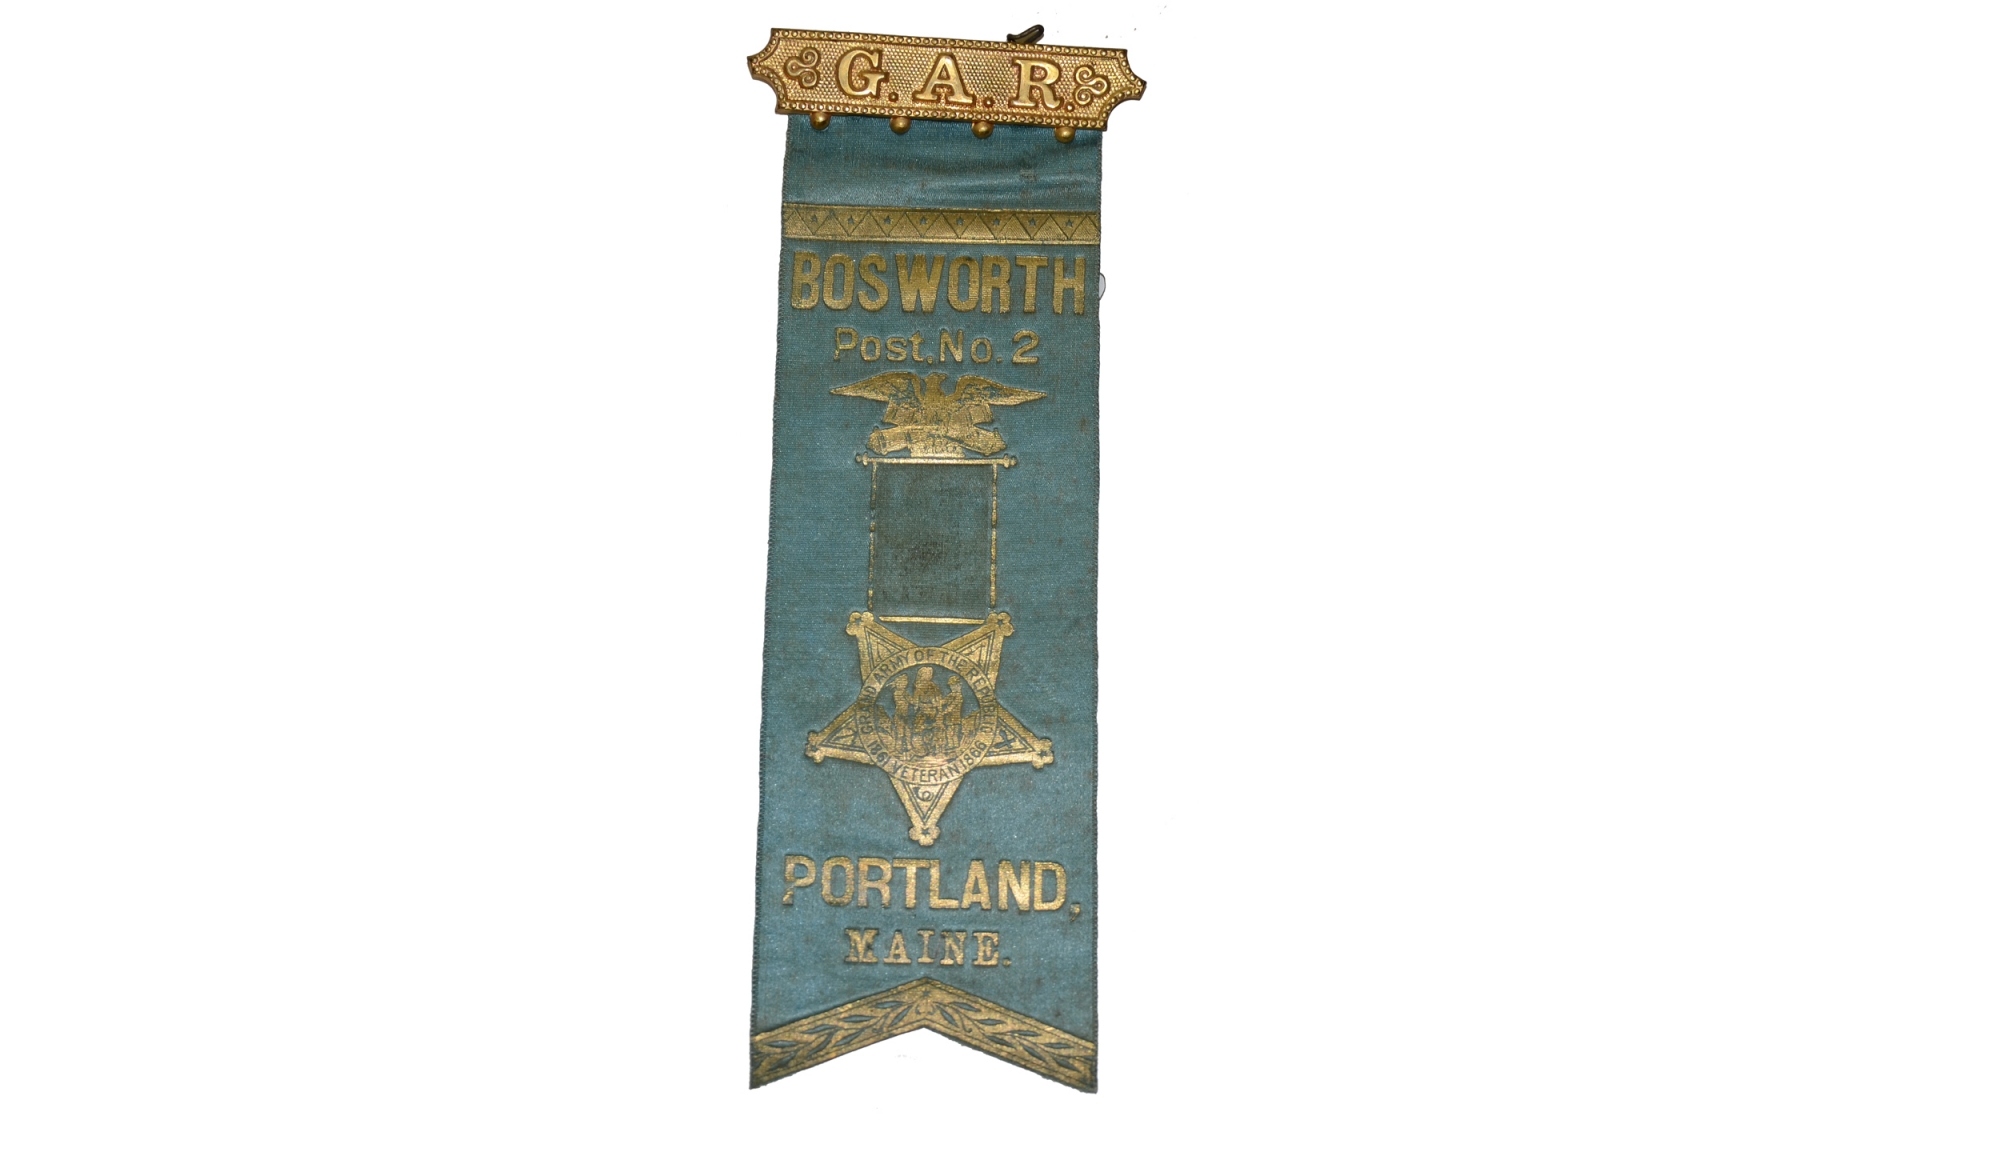 G.A.R. RIBBON, BOSWORTH POST NO. 2, PORTLAND, MAINE — Horse Soldier